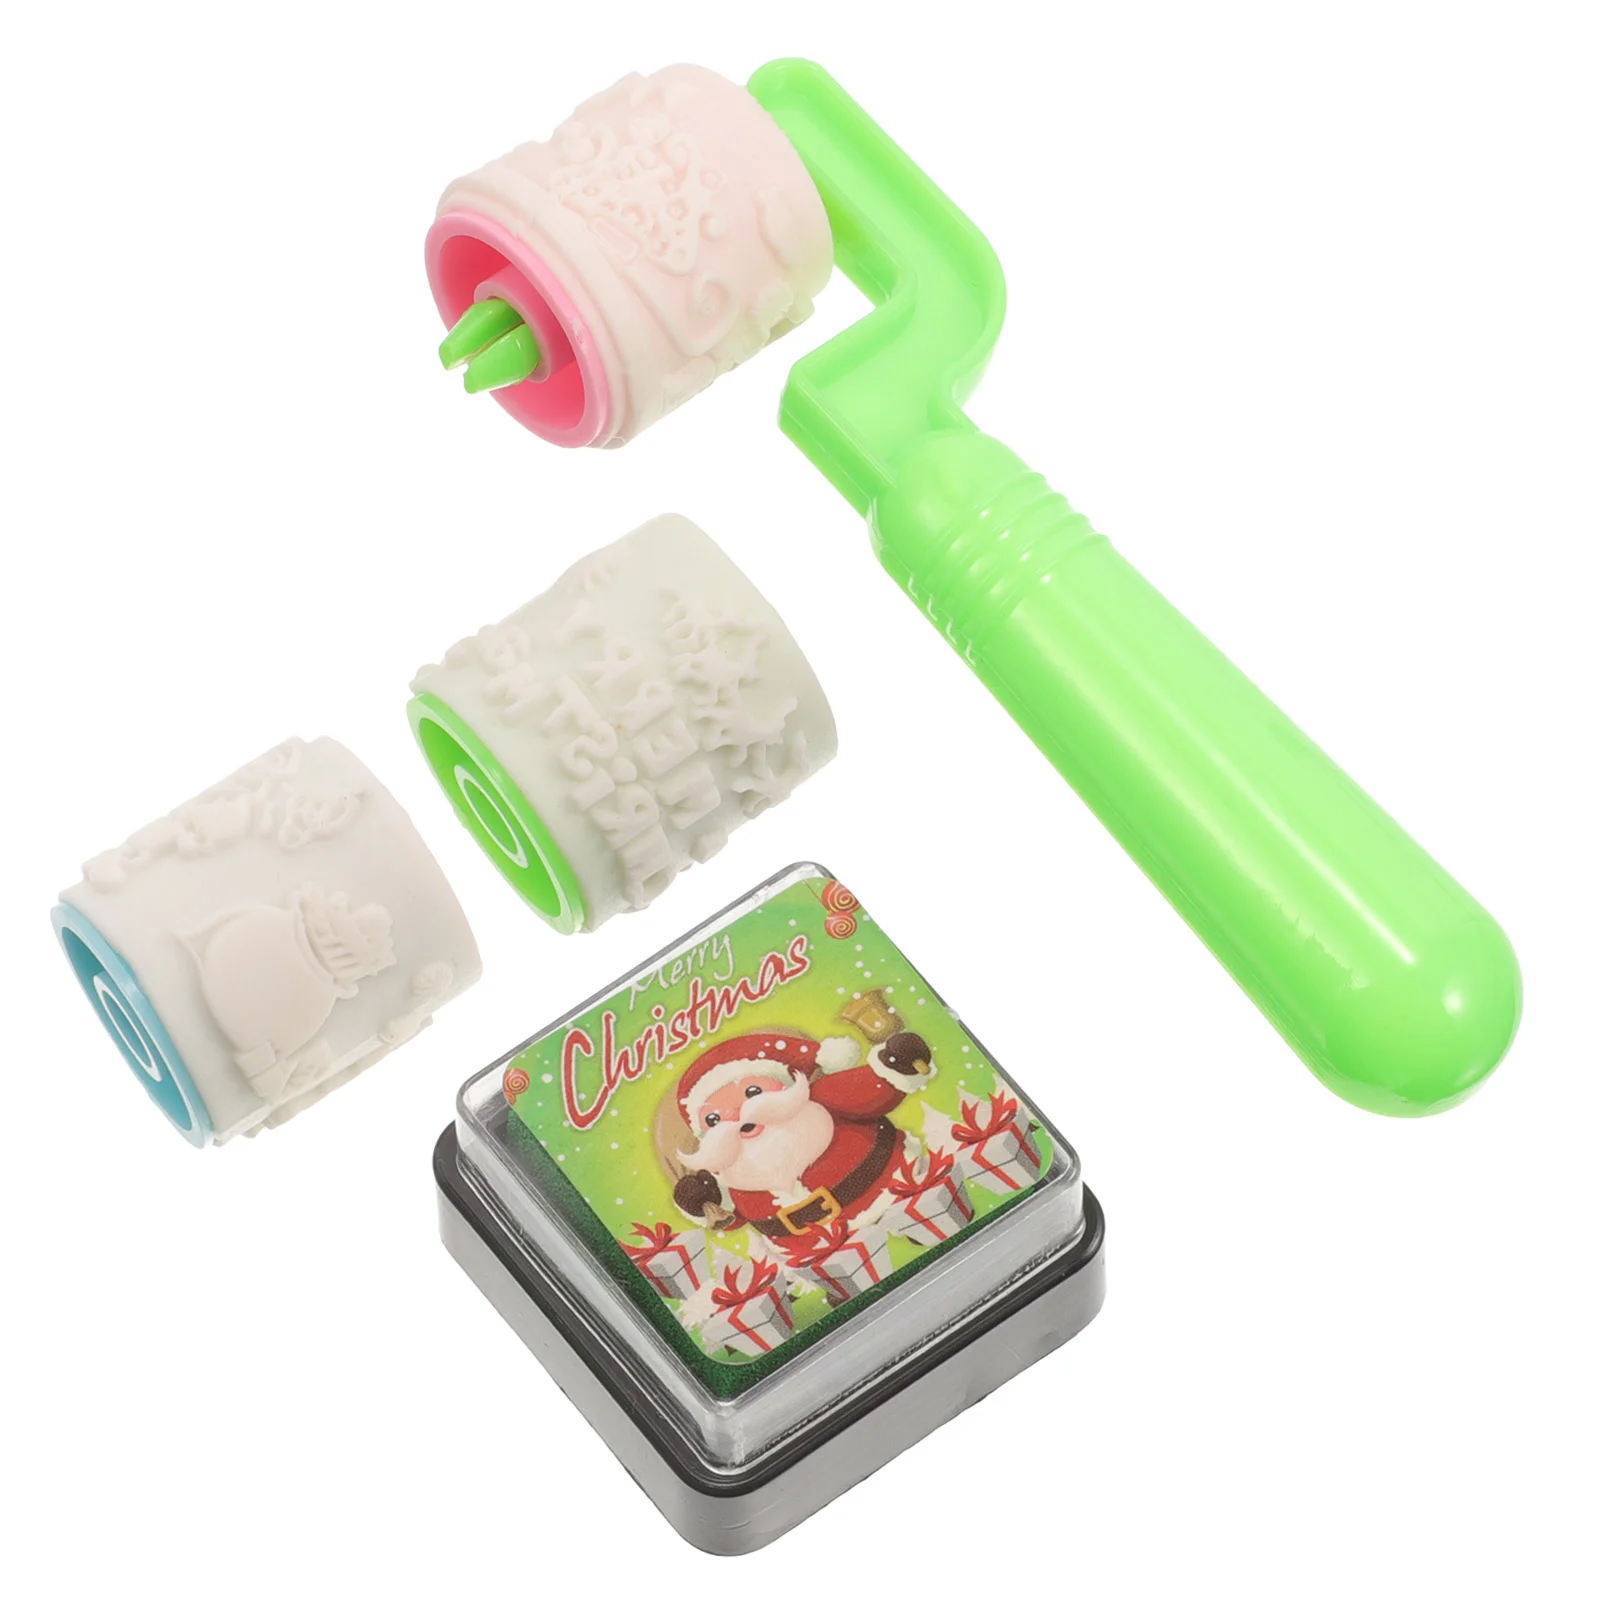 

Christmas Stamps Rollers Set Cute Nutcracker Kids Self-Ink Stampers Diy Card Christmas Party Favors Stocking Stuffers Kids